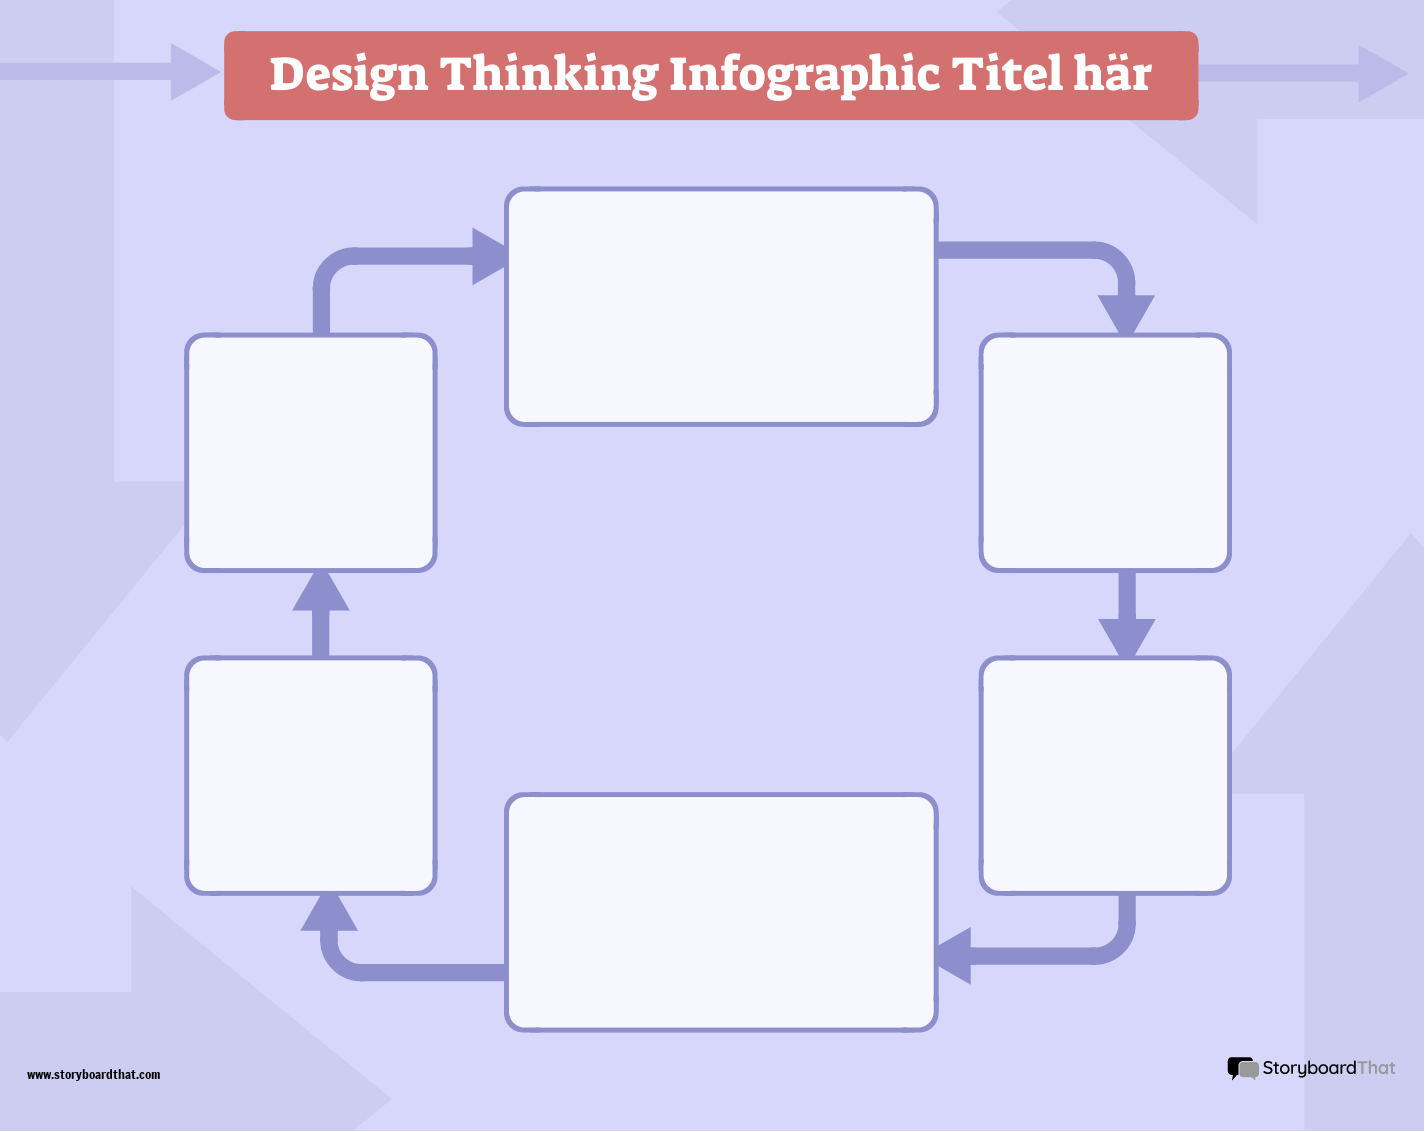 Corporate Design Thinking Infographic Mall 1